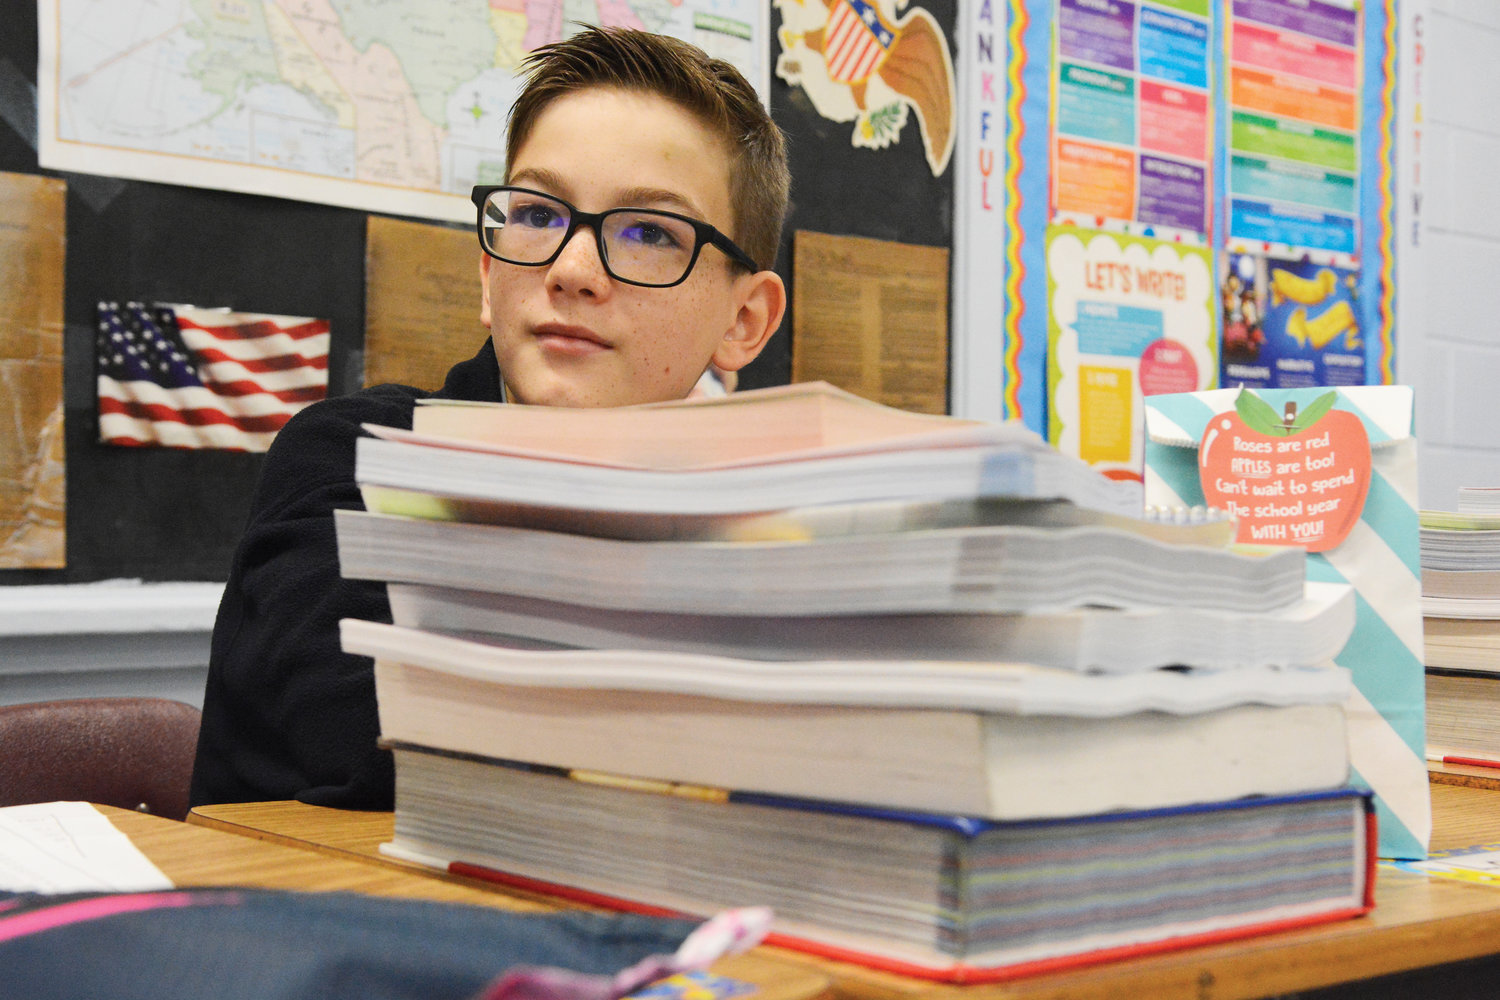 The books were piled high in front of seventh-grader Logan Claire.